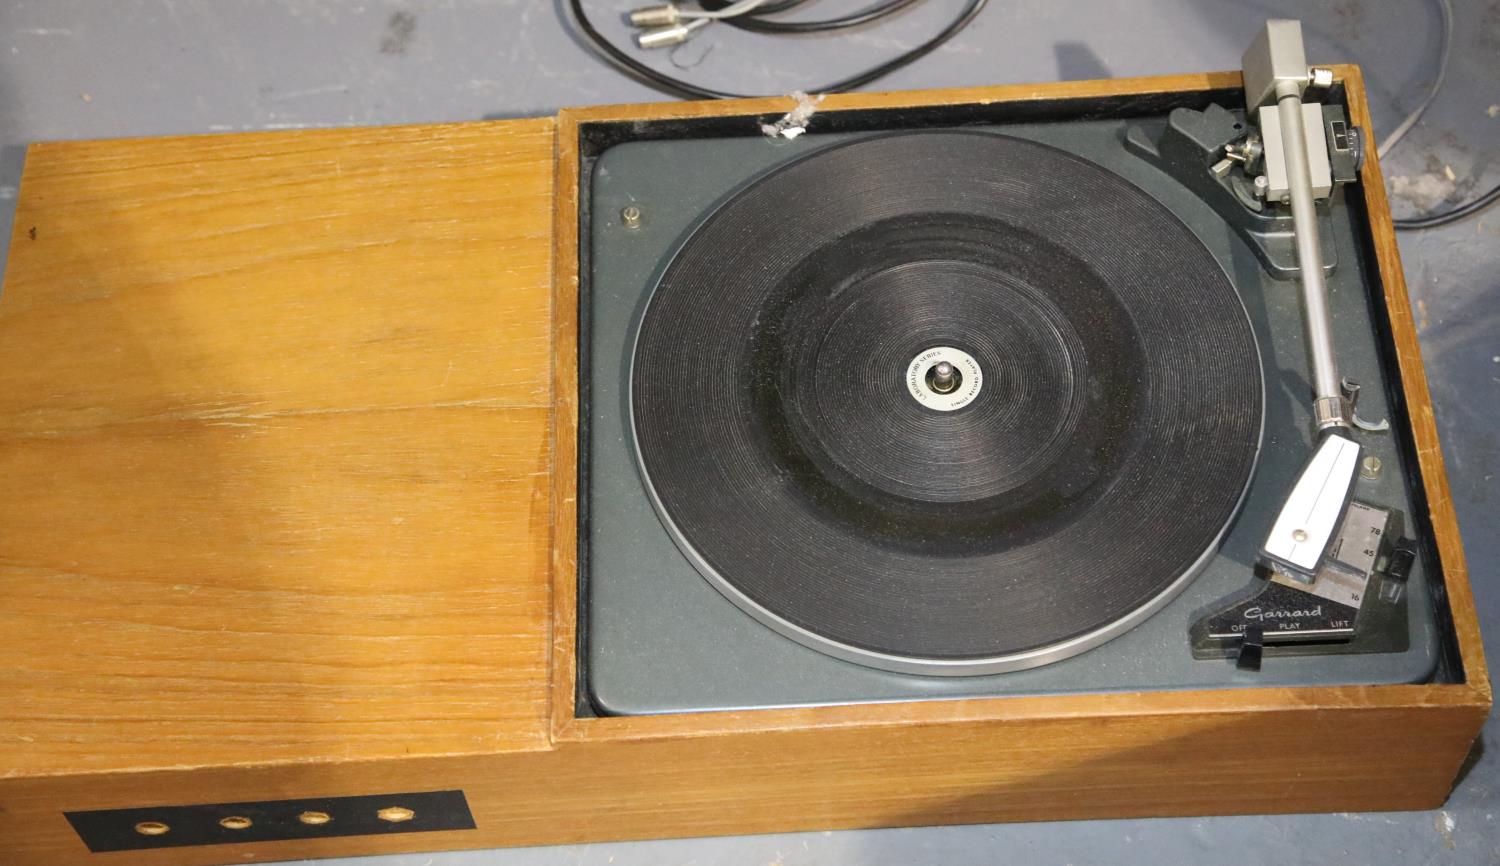 Garrard SP25 MkII turntable. P&P Group 3 (£25+VAT for the first lot and £5+VAT for subsequent lots)